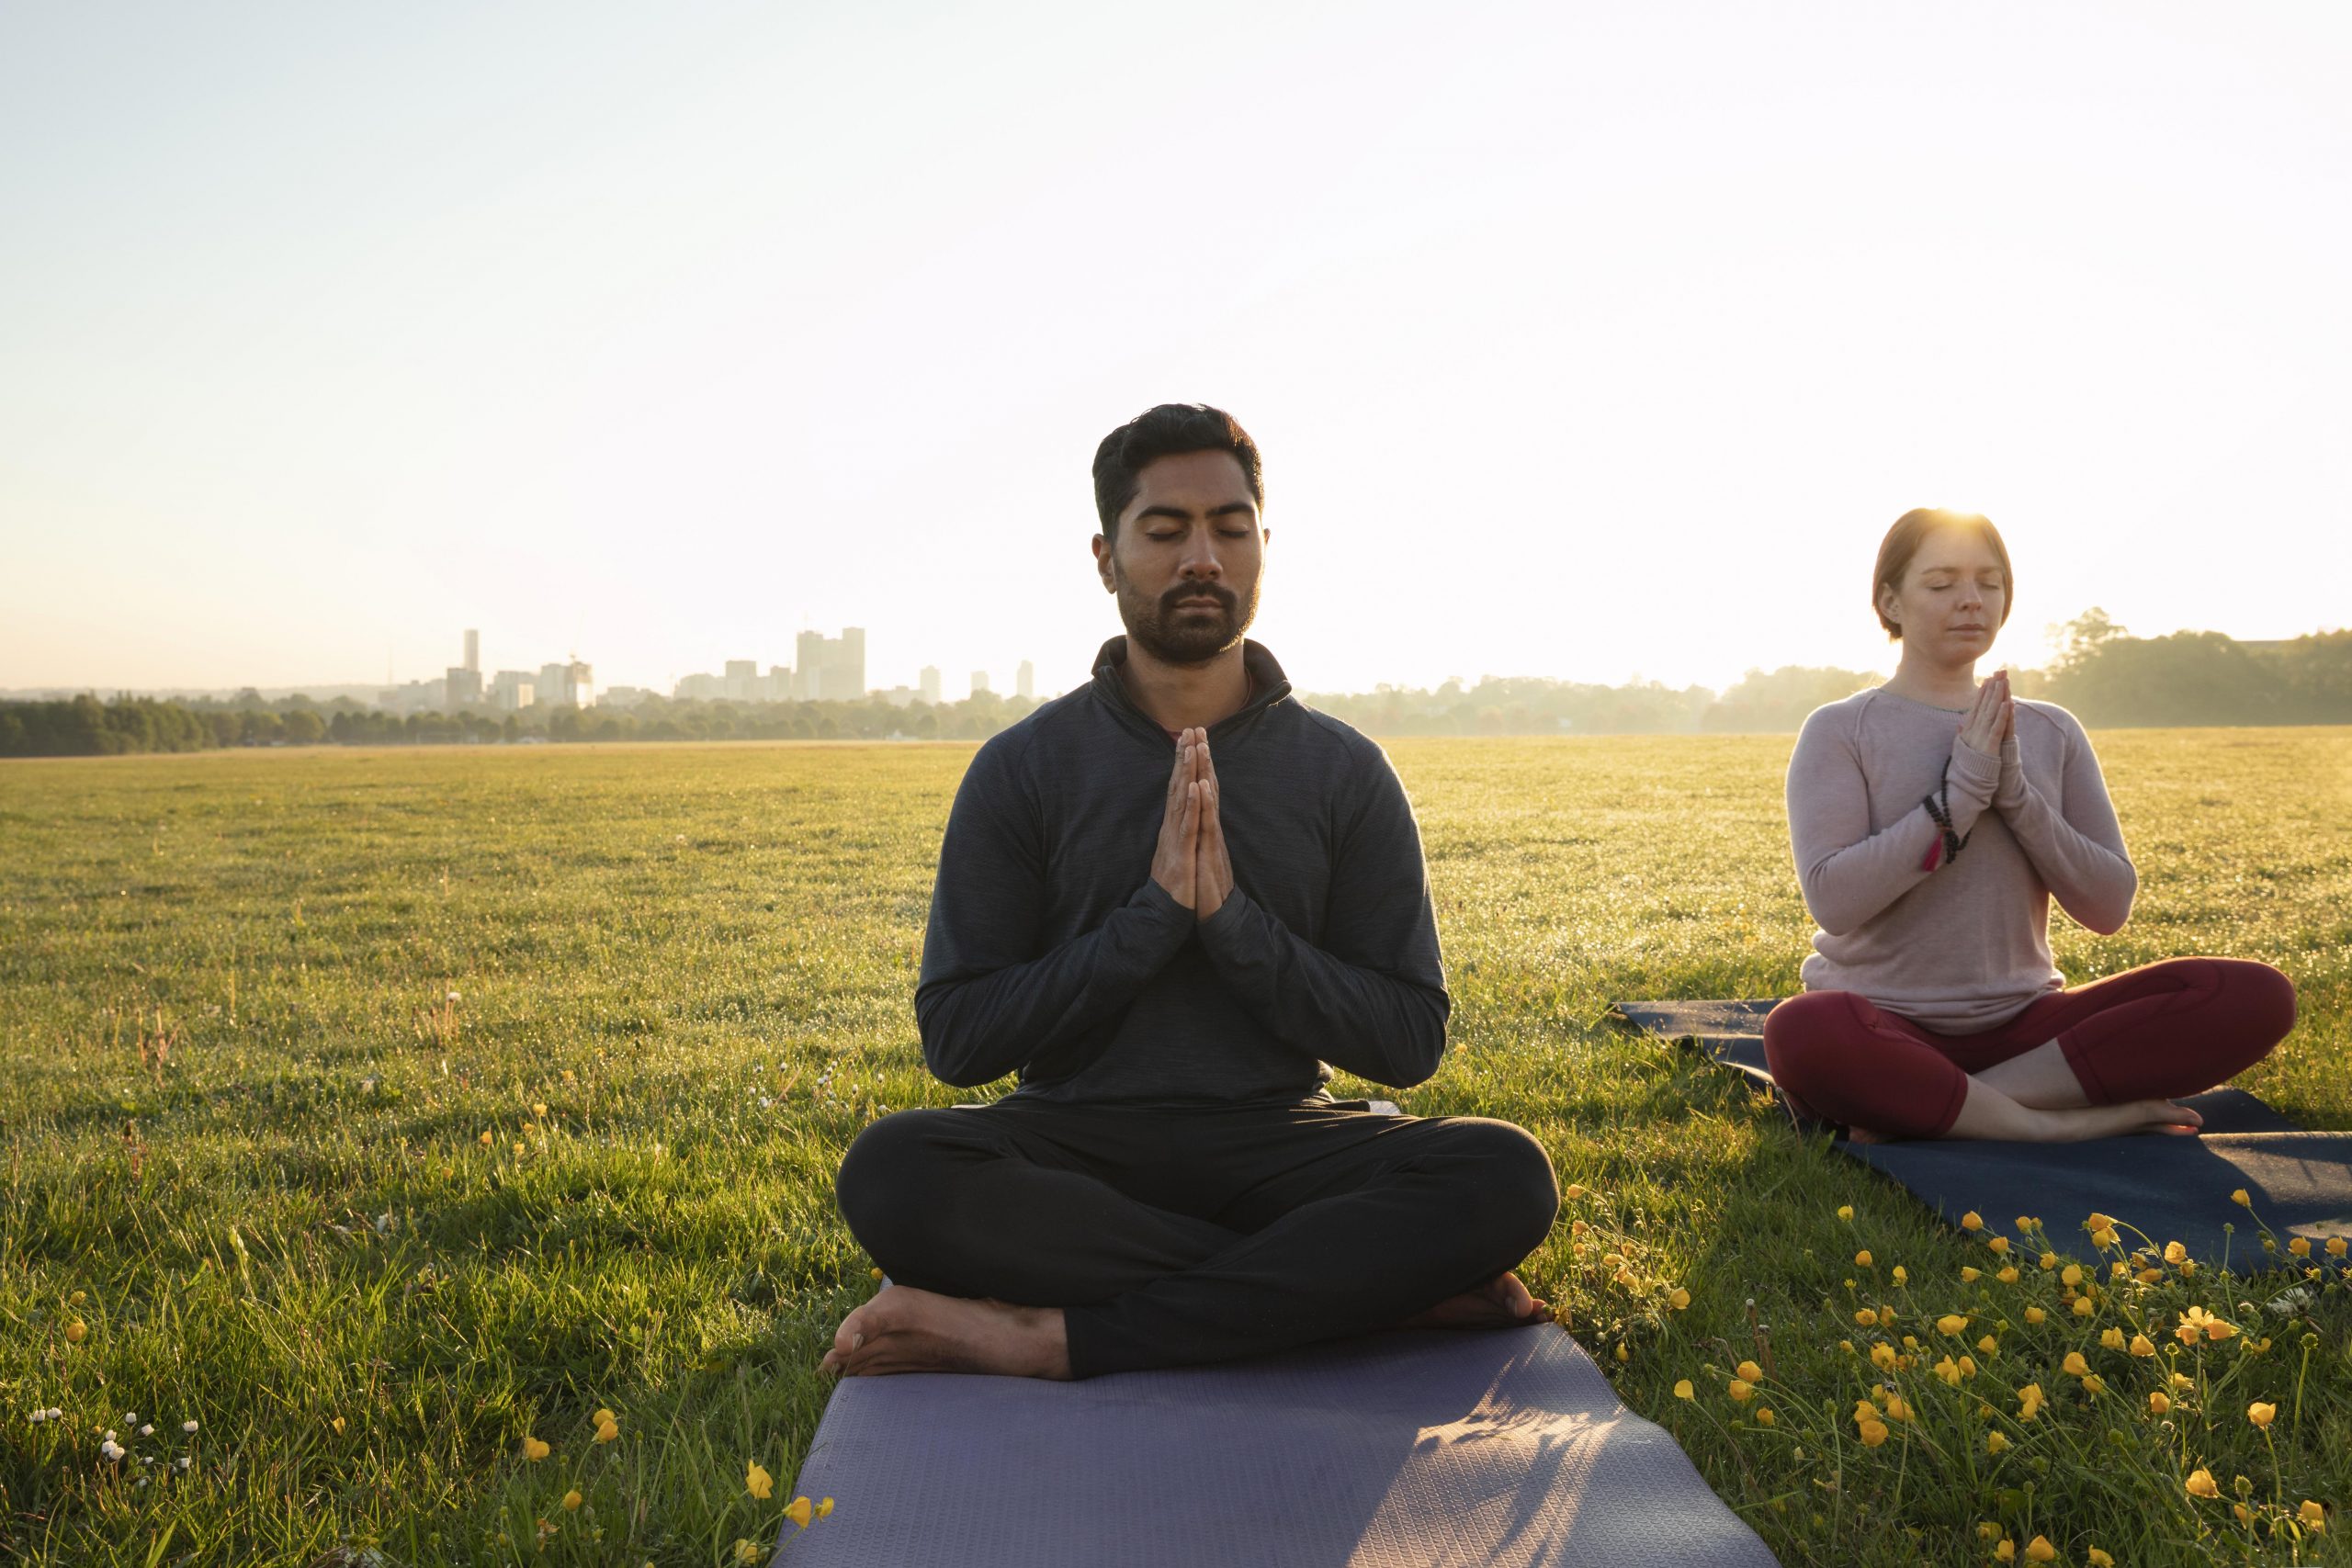 front-view-man-woman-meditating-outdoors-scaled.jpg